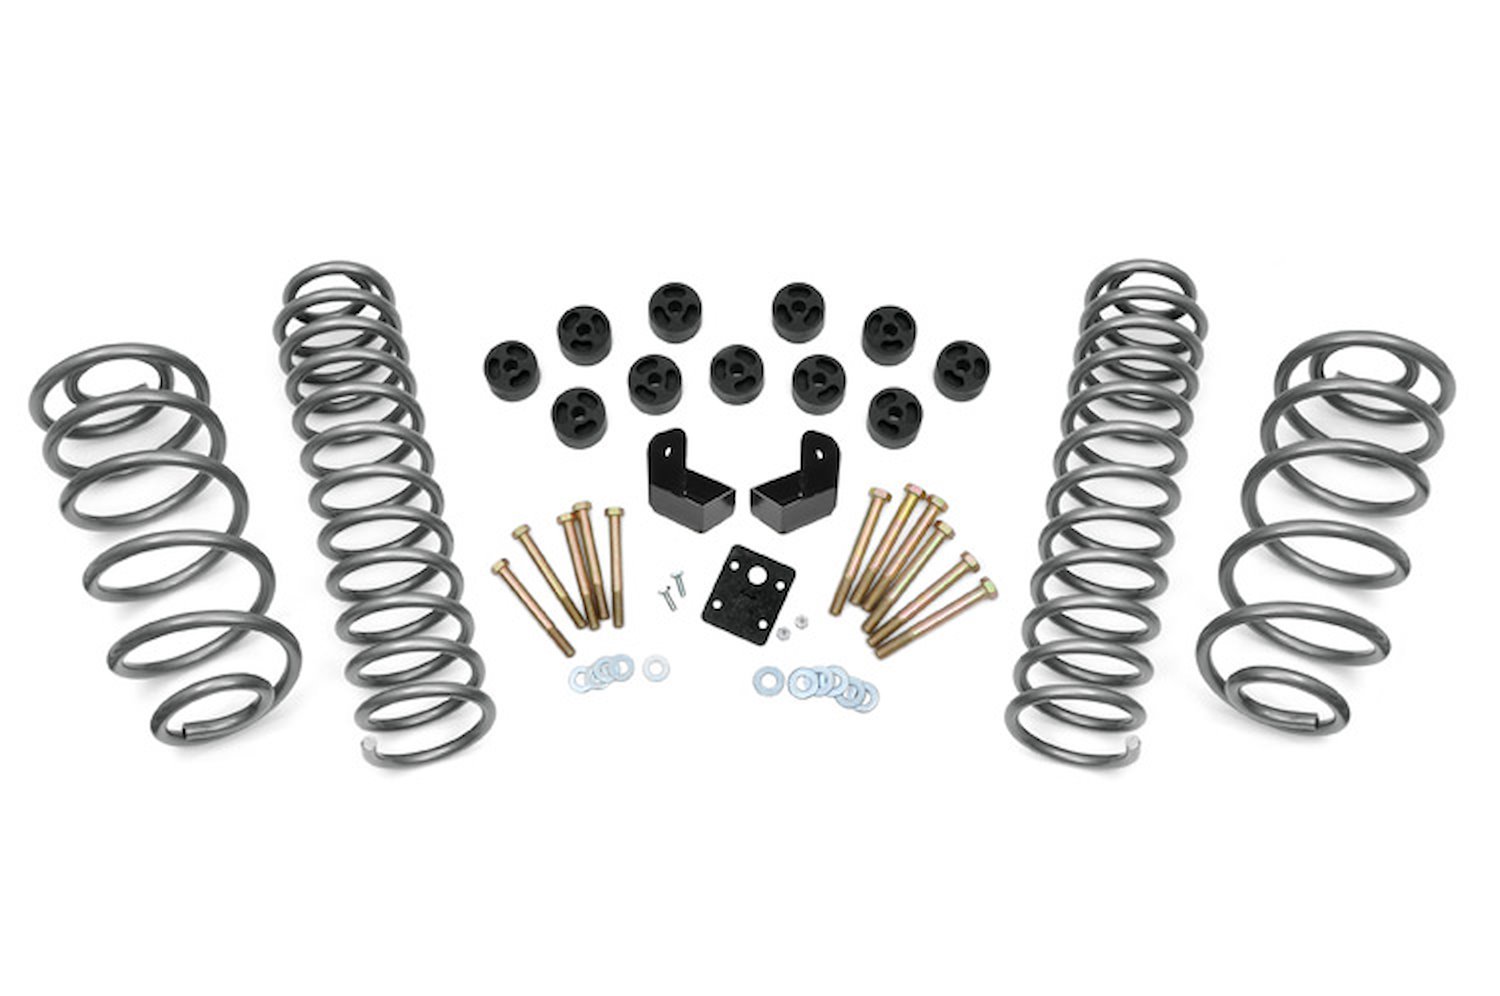 647 3.75 in. Lift Kit, Combo, 6 Cyl, Jeep Wrangler TJ 4WD (97-06)